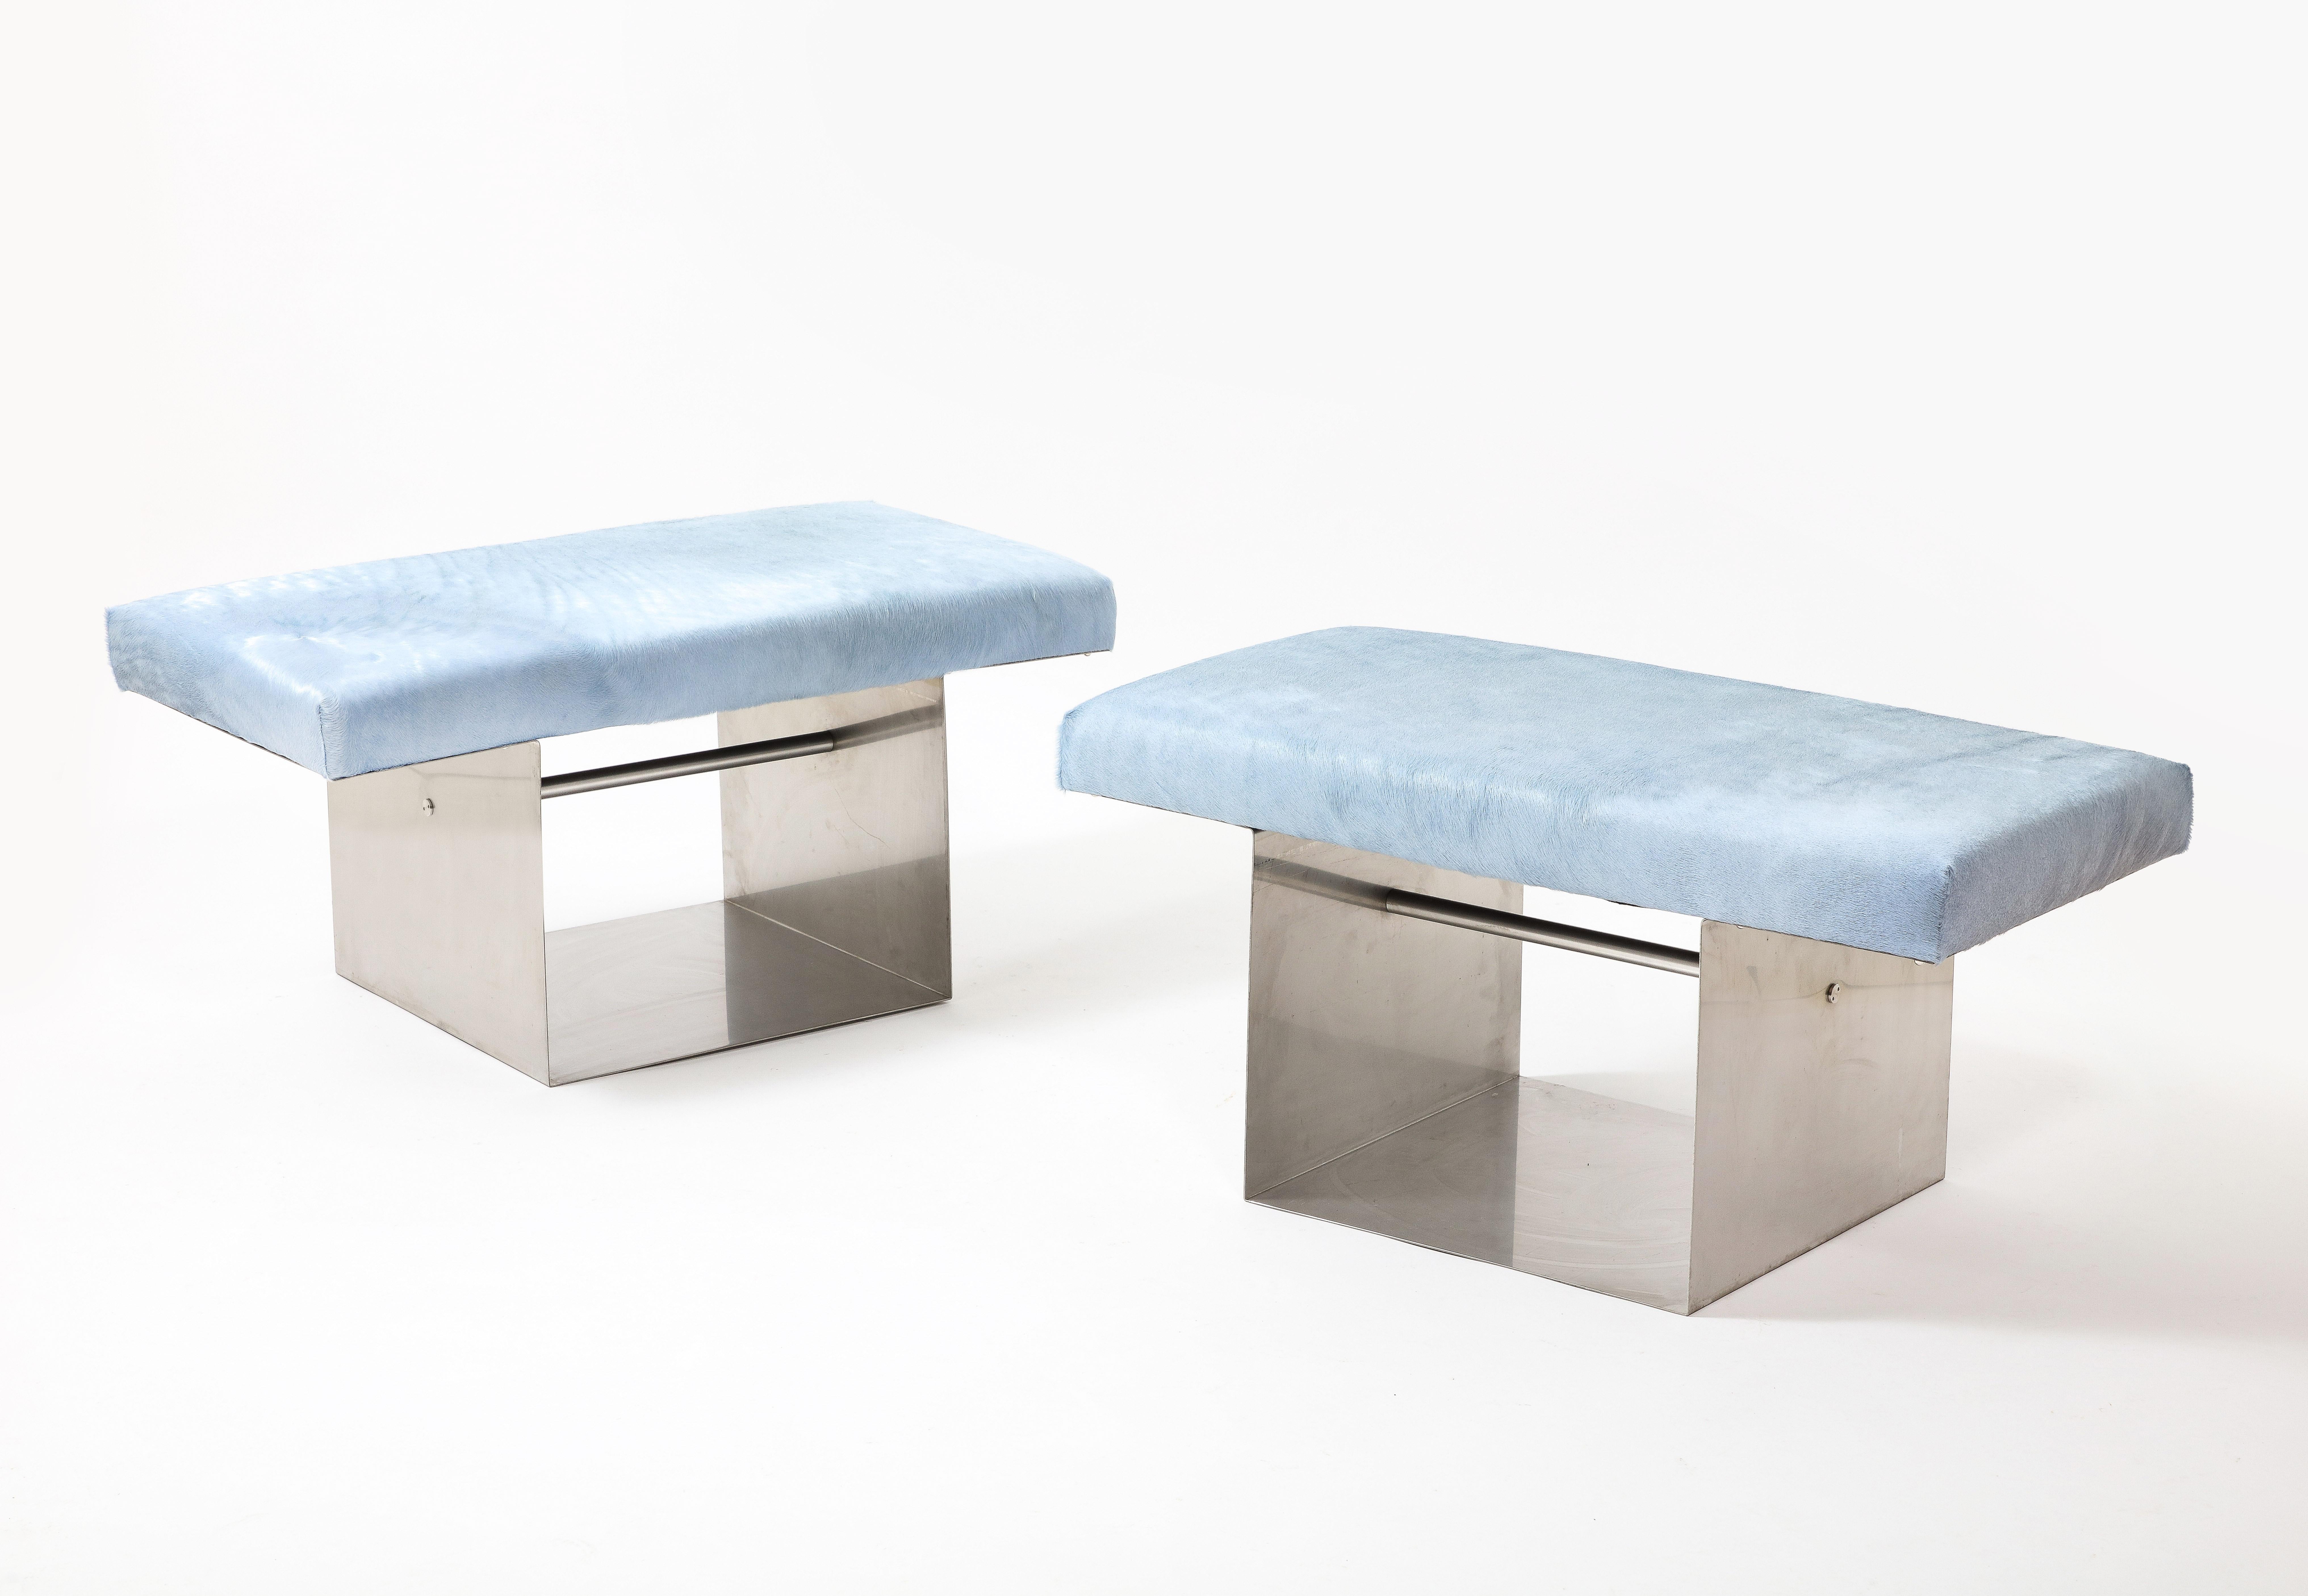 Bent stainless steel benches with light blue hair on hide upholstery.
